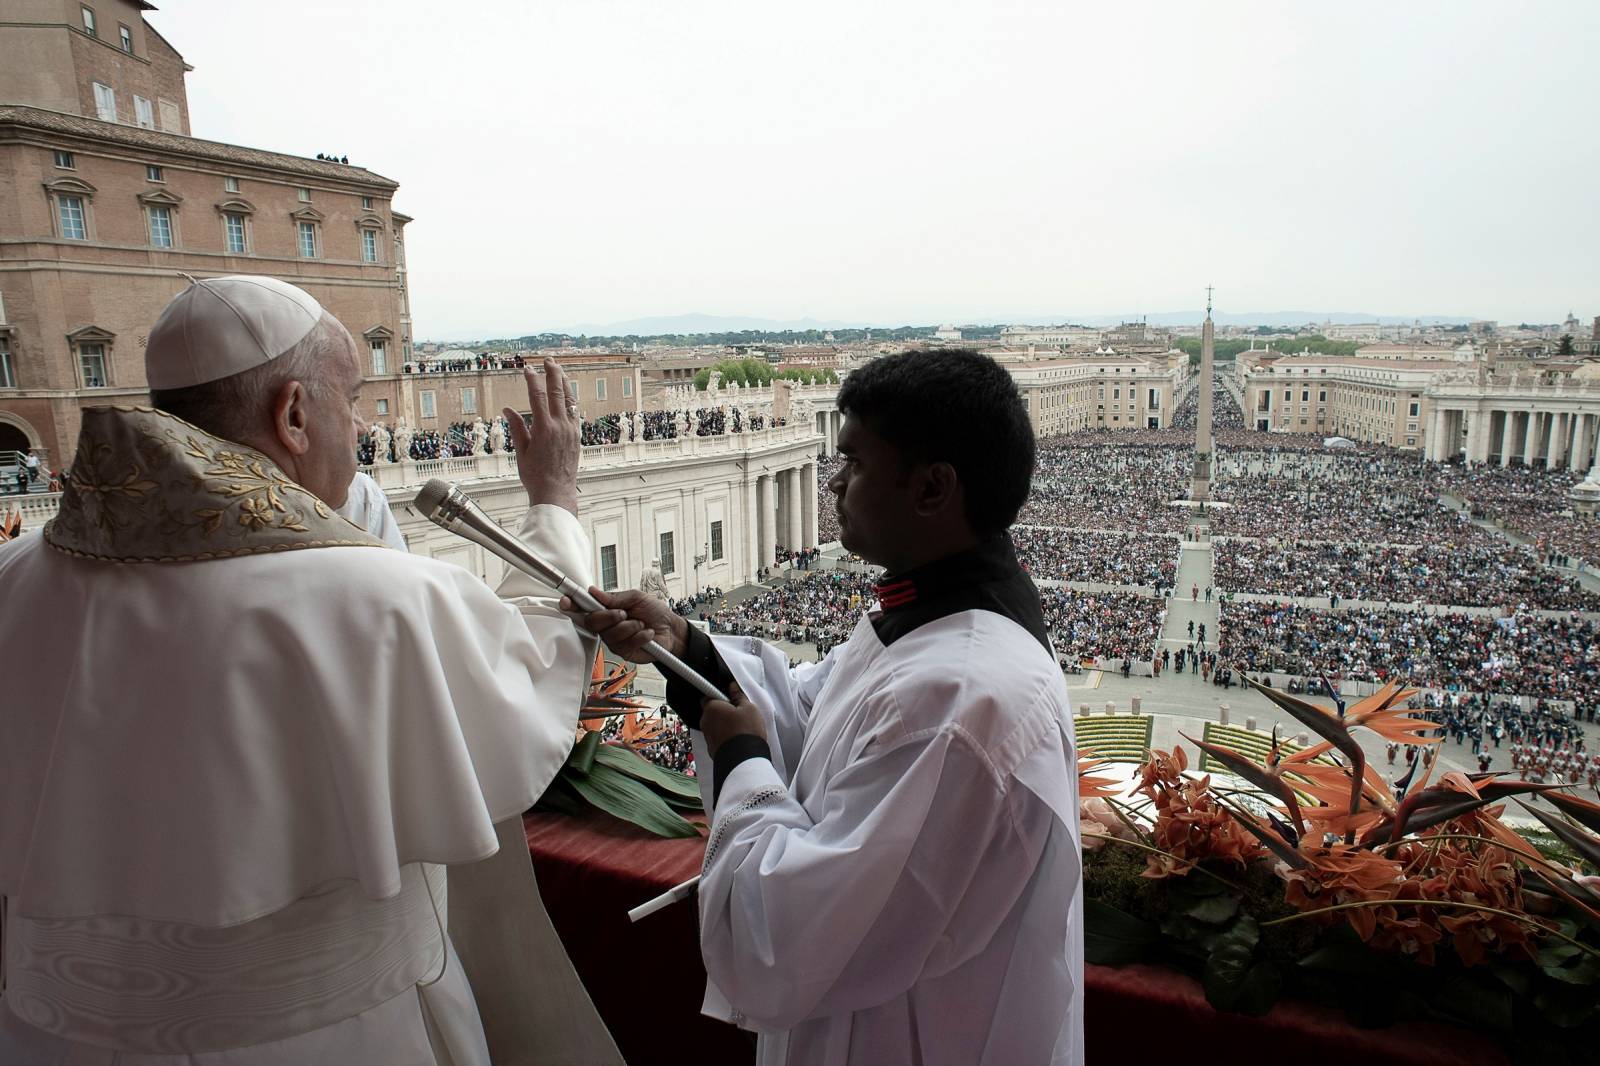 Pope Francis leads the Easter Mass at St. Peter's Square